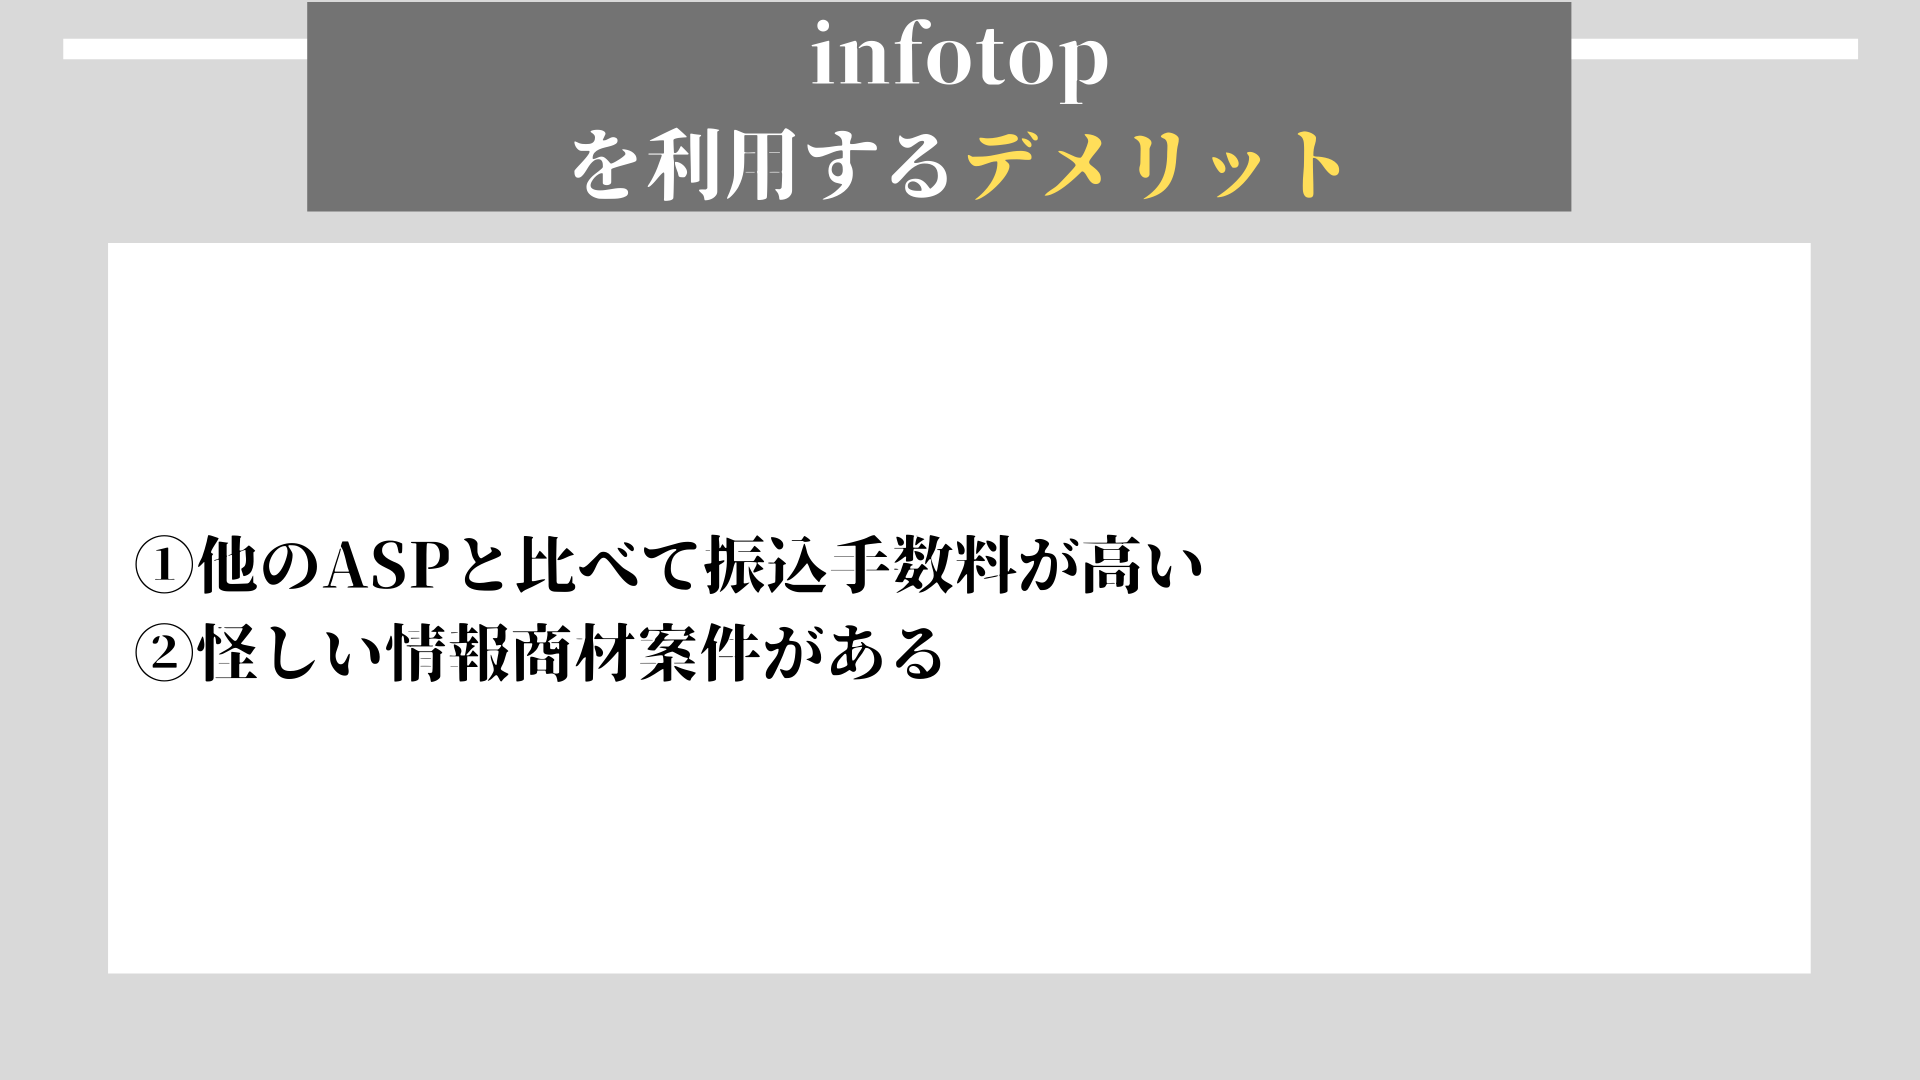 infotop　デメリット